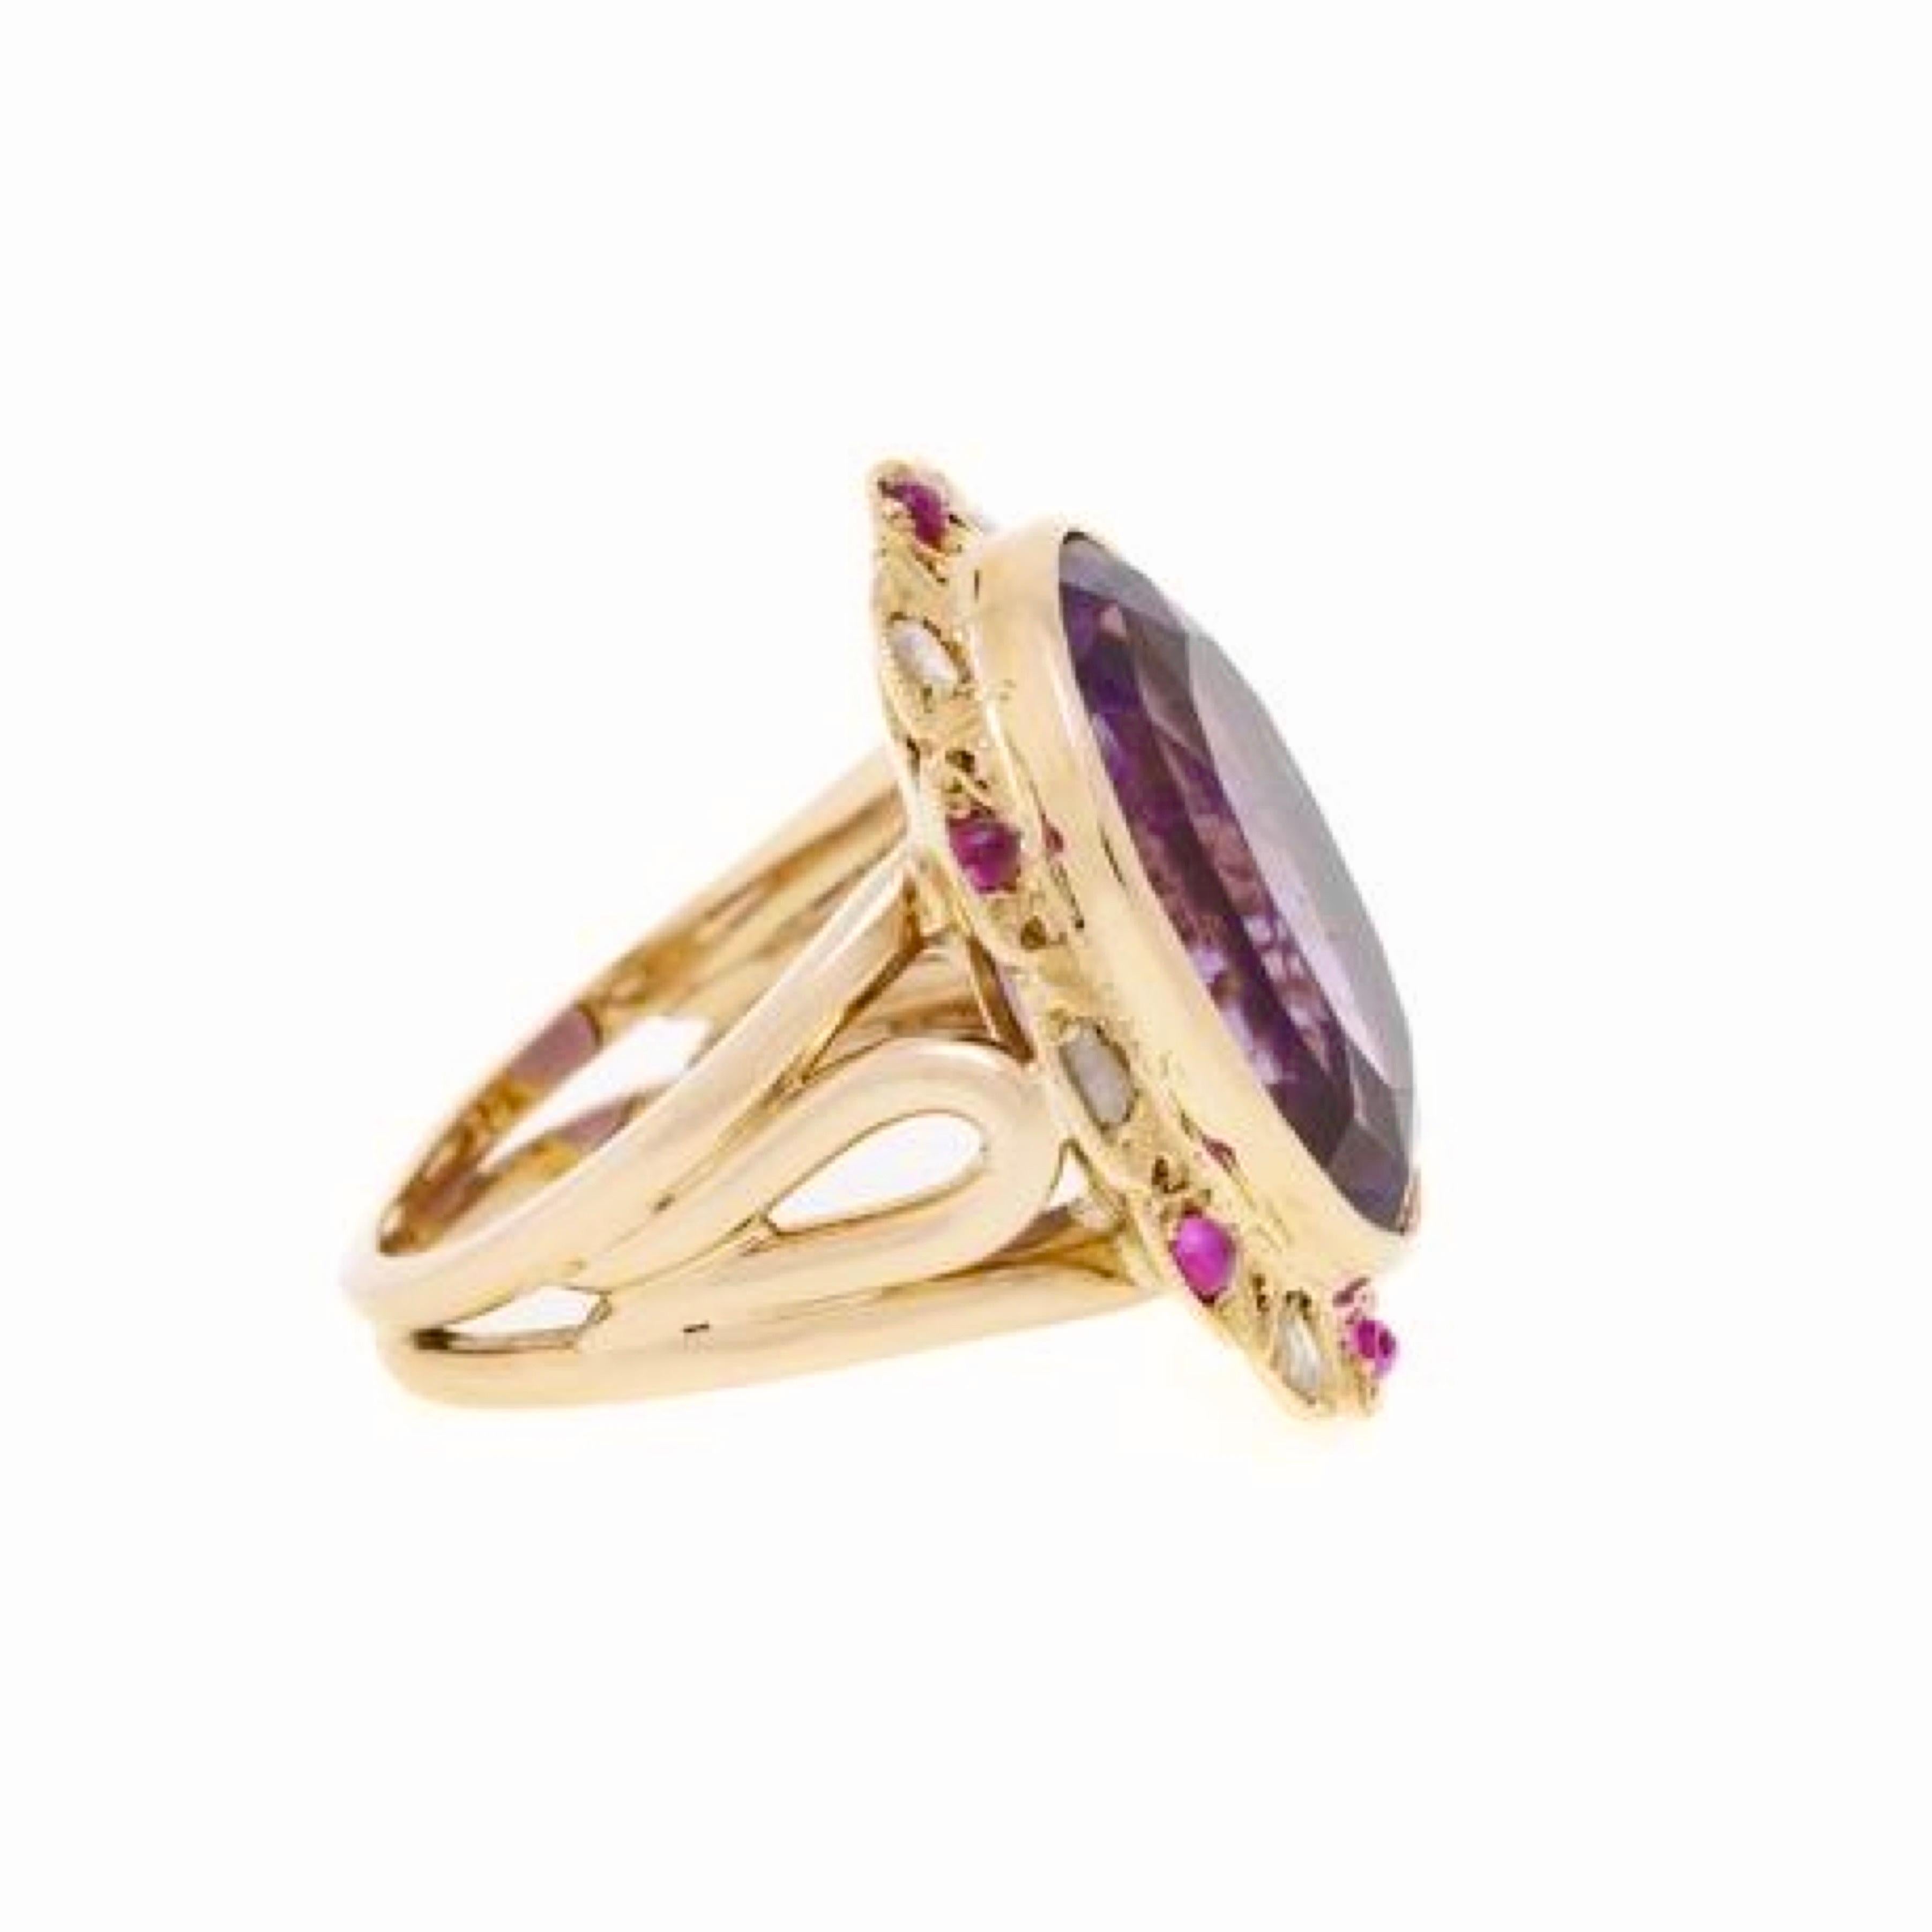 A pompadour ring set with an oval cut amethyst surrounded by cabochons of pink sapphires and rose cut diamonds on pink gold.

Estimated weight of the amethyst : 8.40 carats

Dimensions : 19.81 x 23.56 x 7.49 mm (0.779 x 0.927 x 0.295 inch)

Total